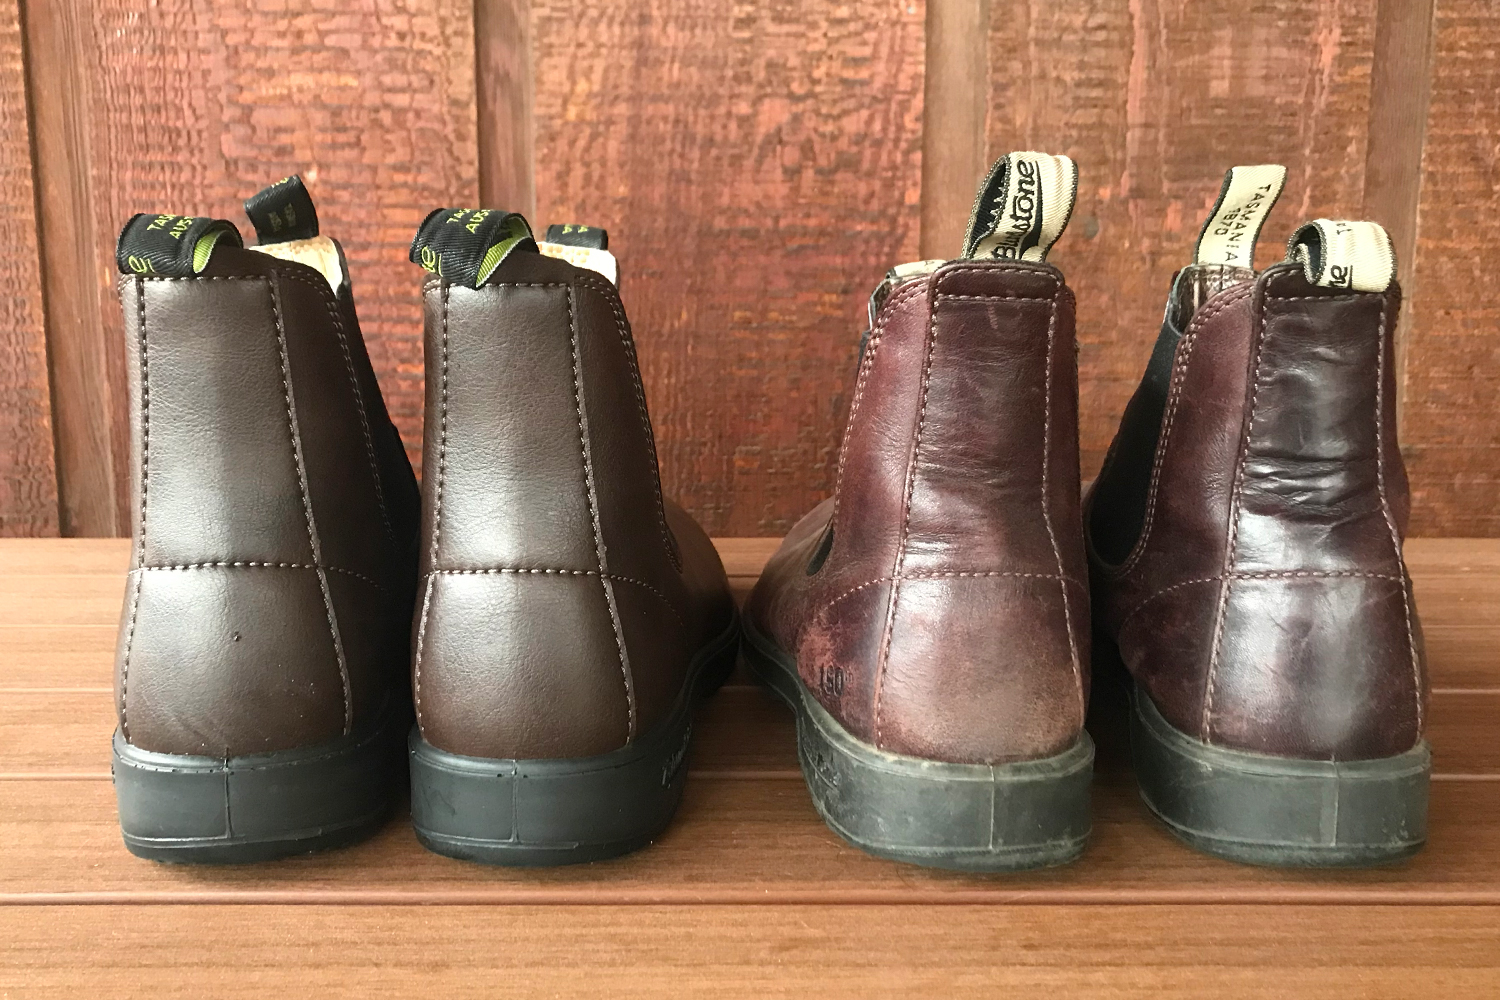 Review: I Tested Blundstone's First Vegan Chelsea Boots - InsideHook